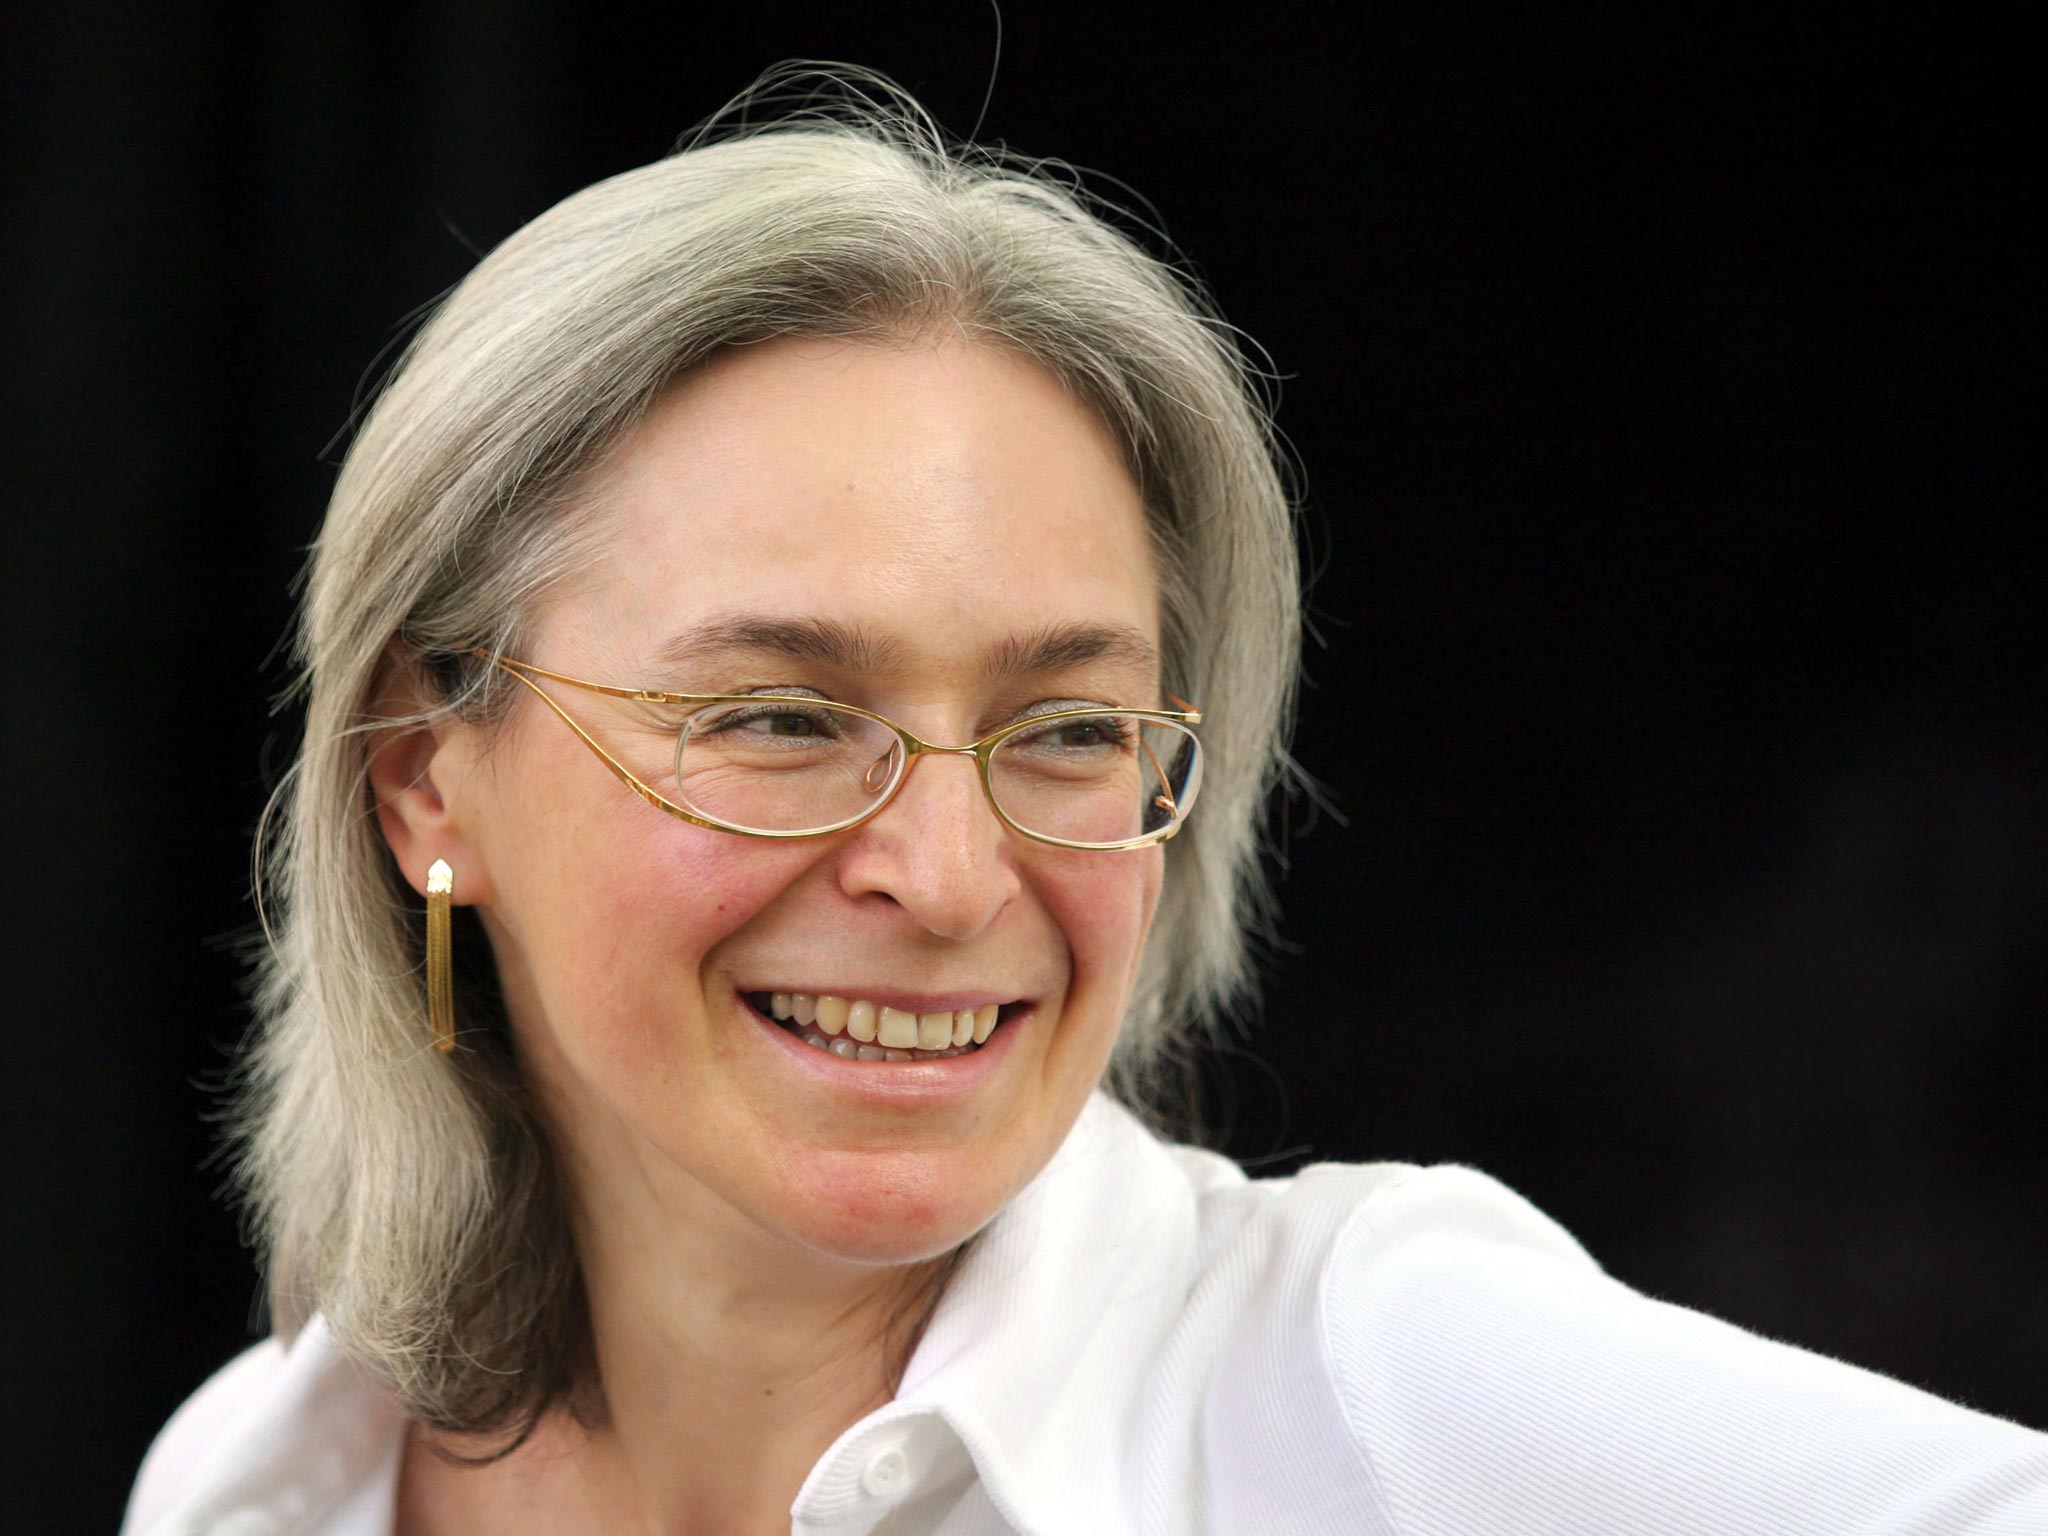 Anna Politkovskaya campaigned fearlessly against Russia’s conduct of the war in
Chechnya 